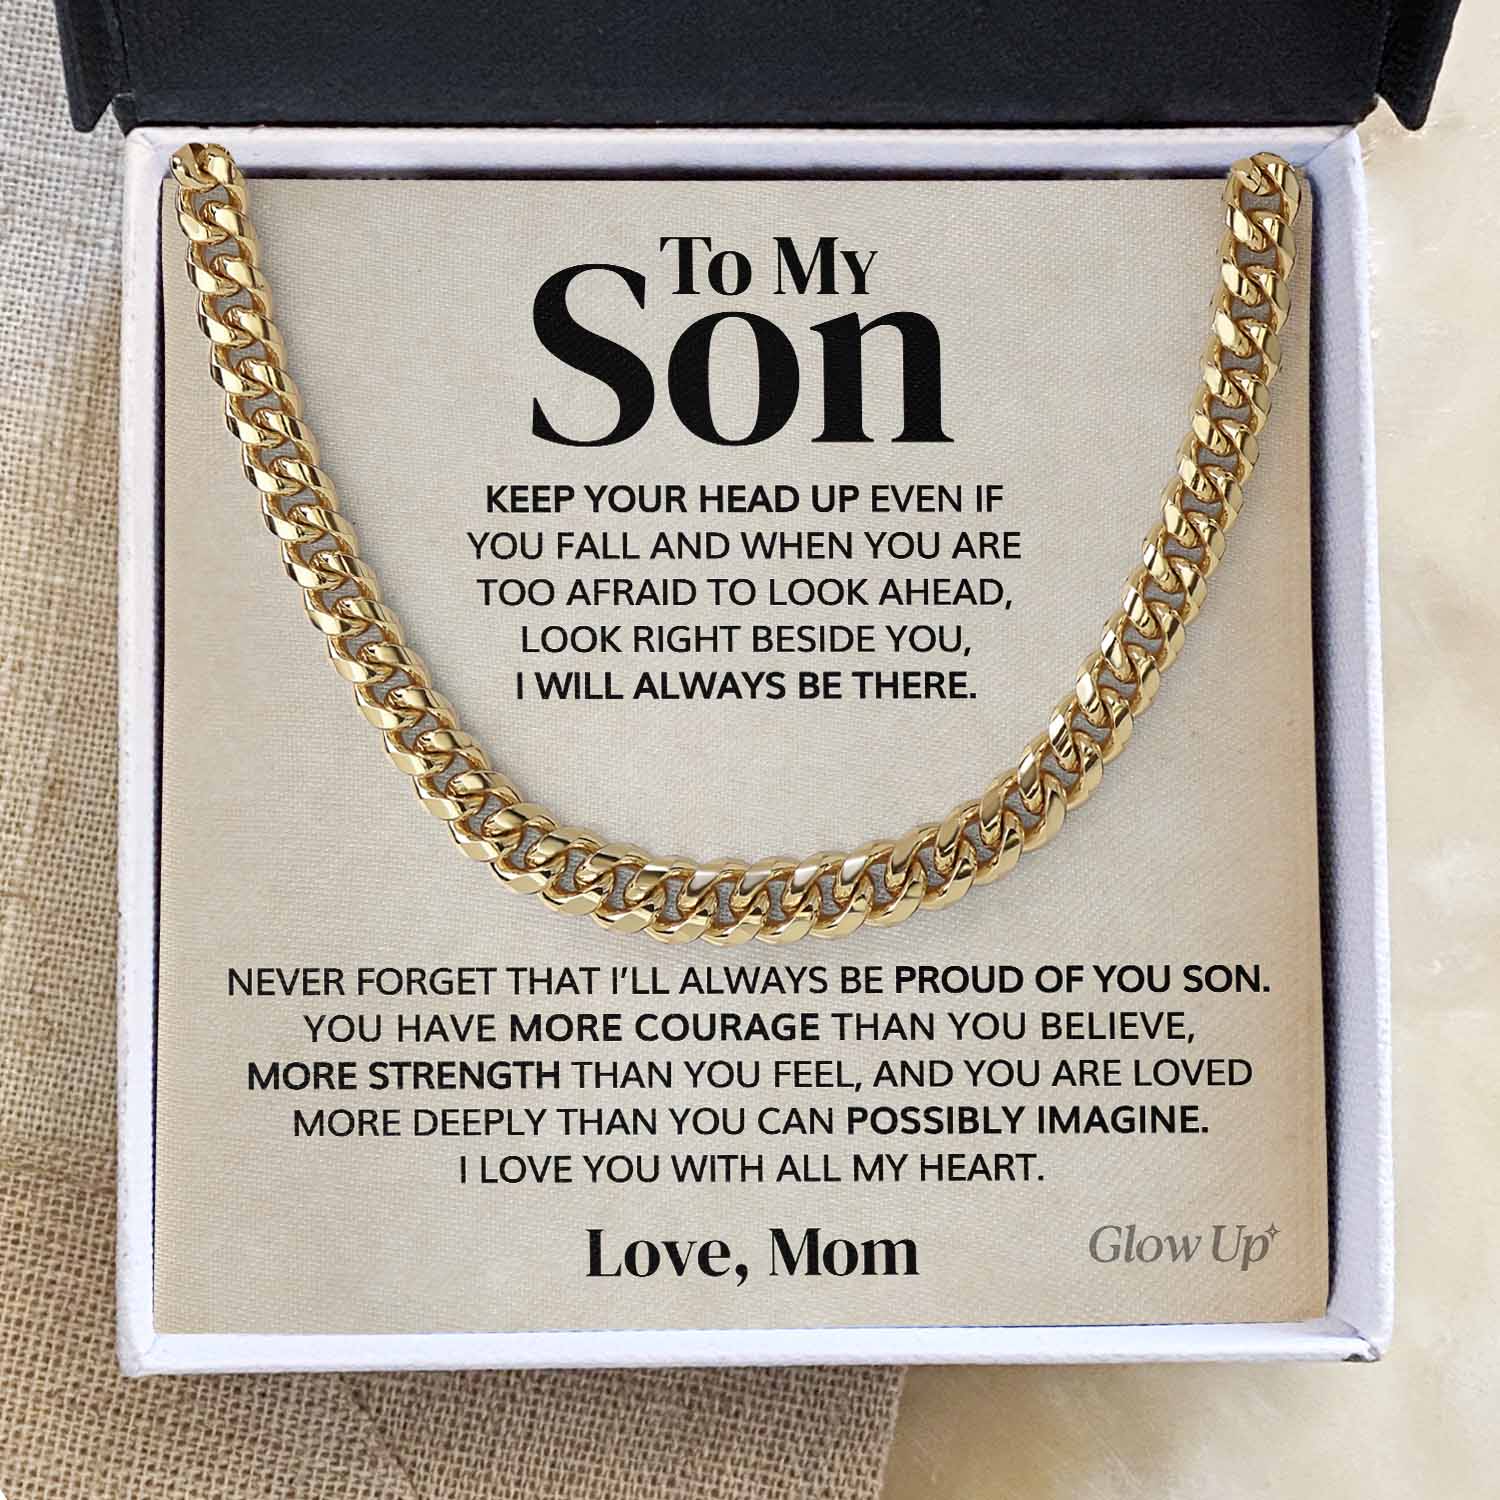 ShineOn Fulfillment Jewelry 14K Yellow Gold Finish / Two-Toned Box To my Son - Keep your head up - Cuban Link Chain Necklace